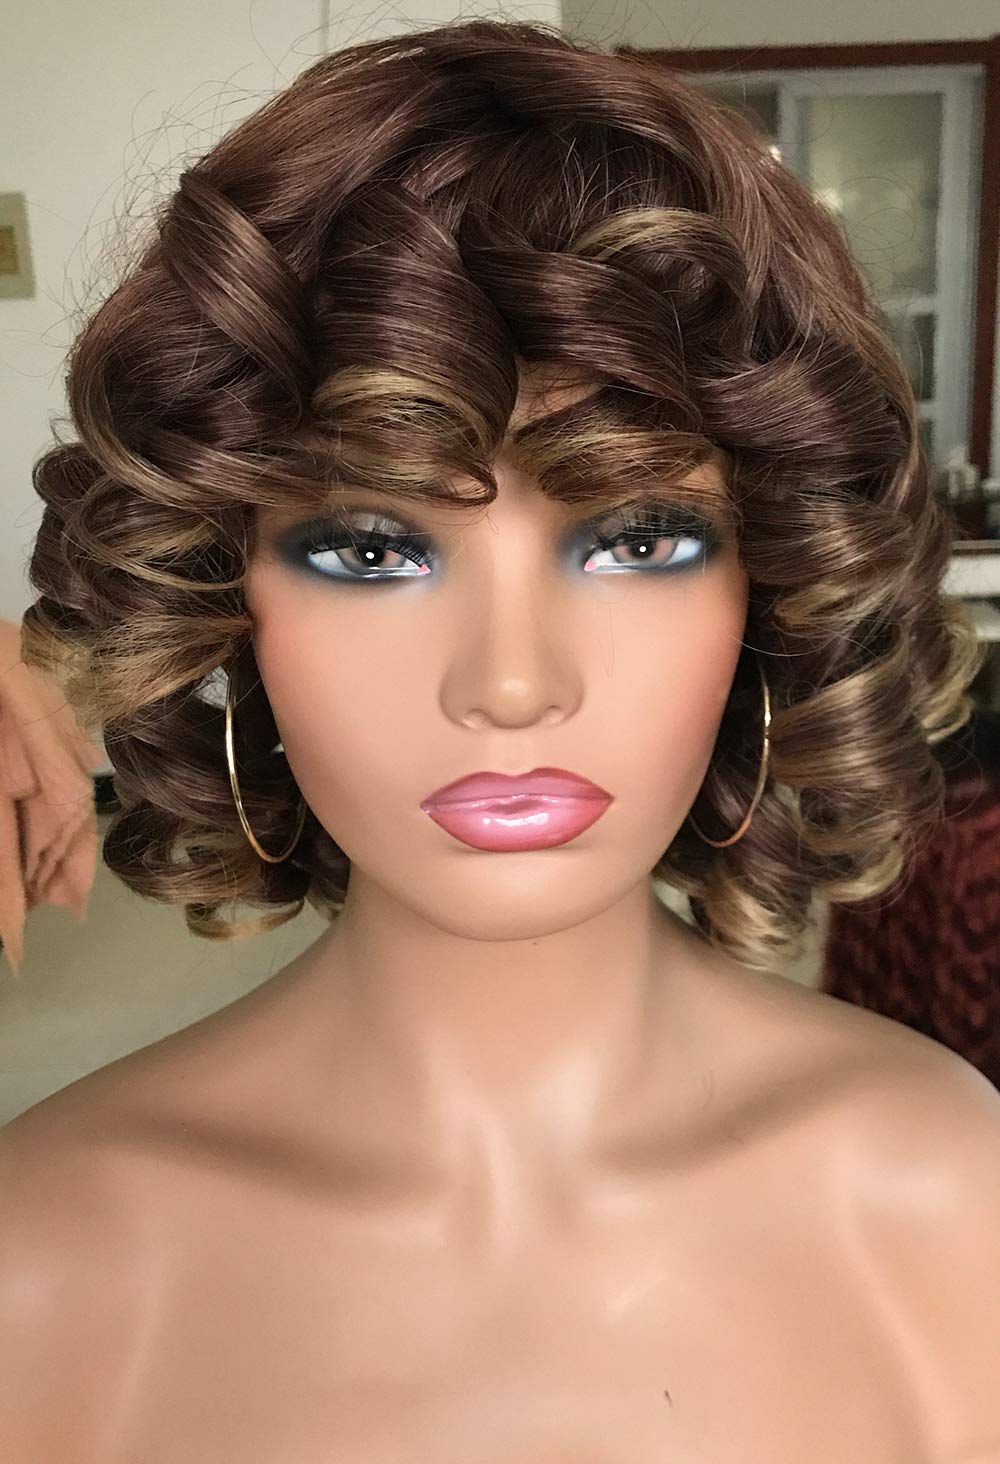 Price:$24.69     Annivia Ombre Blonde Short Curly Wig for Black Women with Bangs Big Bouncy Fluffy Kinky Curly Wig Heat Resist Soft Synthetic Short Curly Afro Wig   Beauty